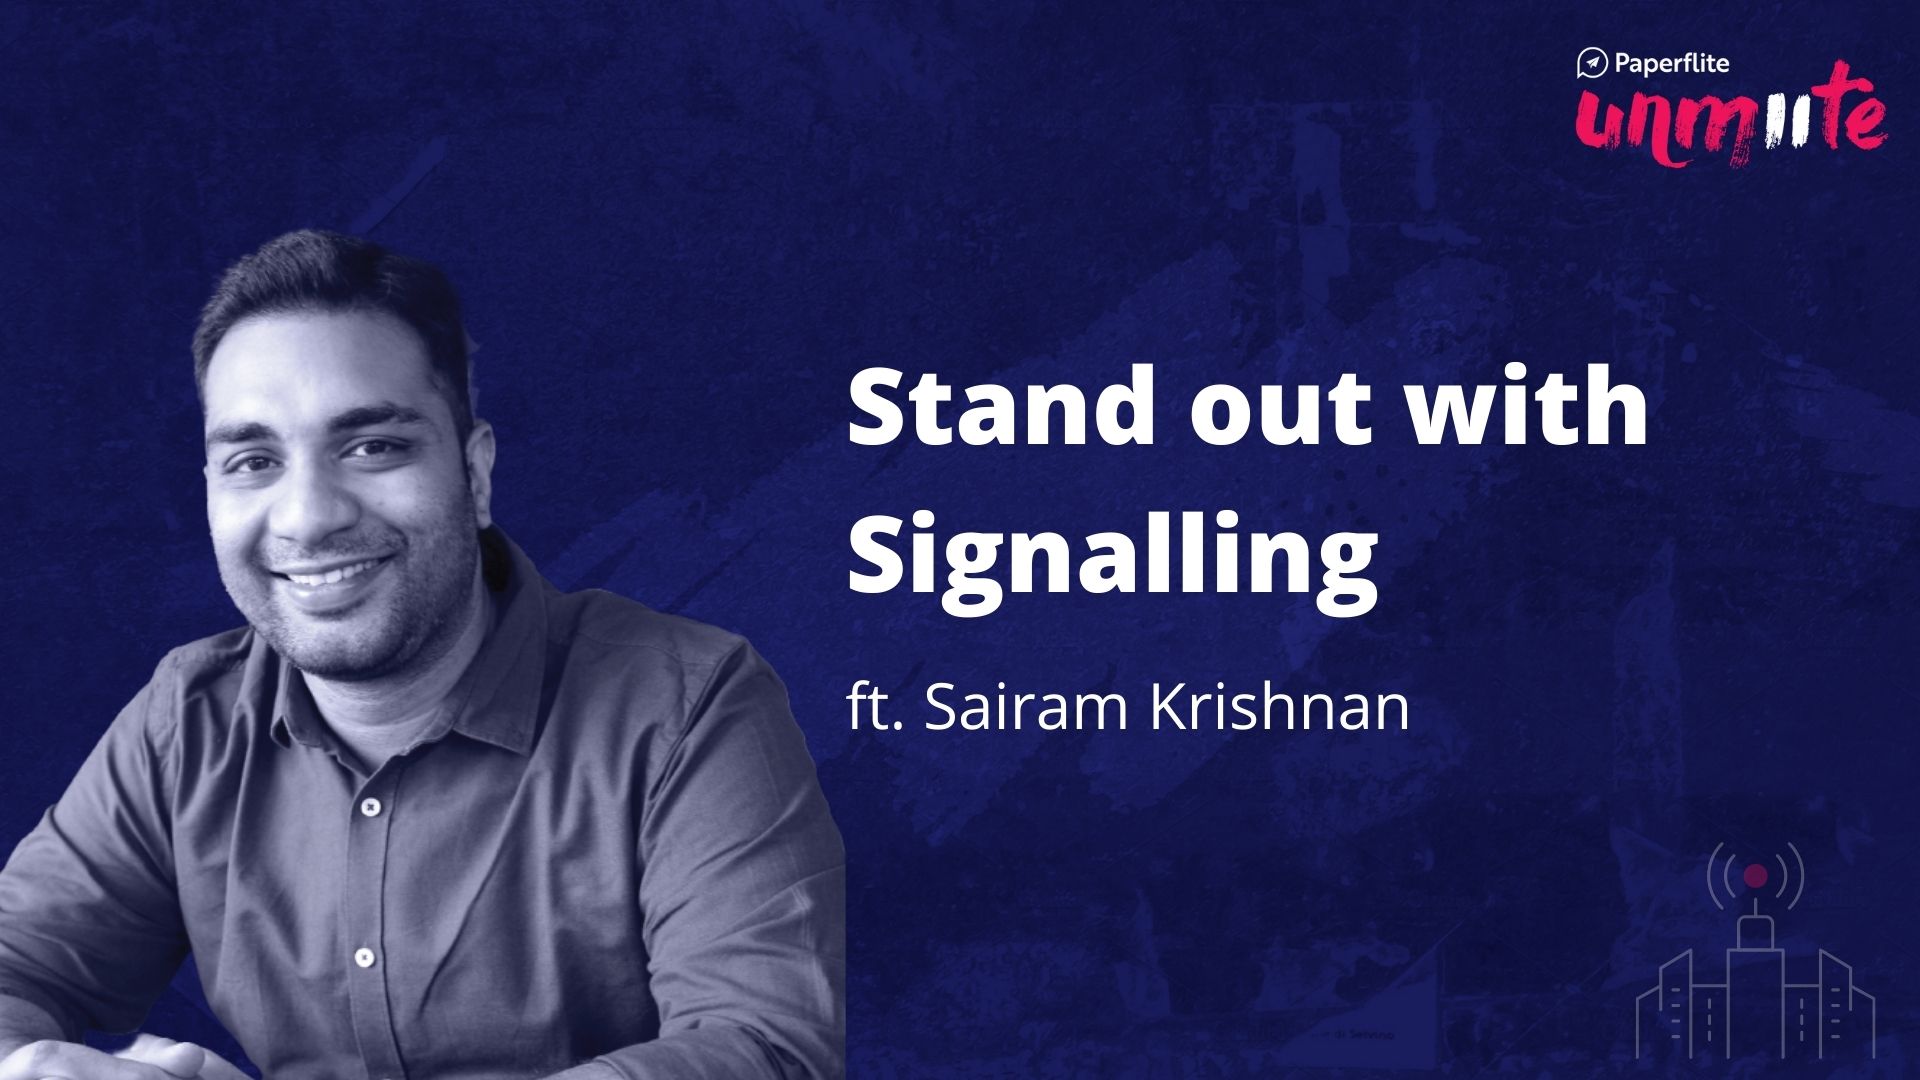 Stand out with Signalling
